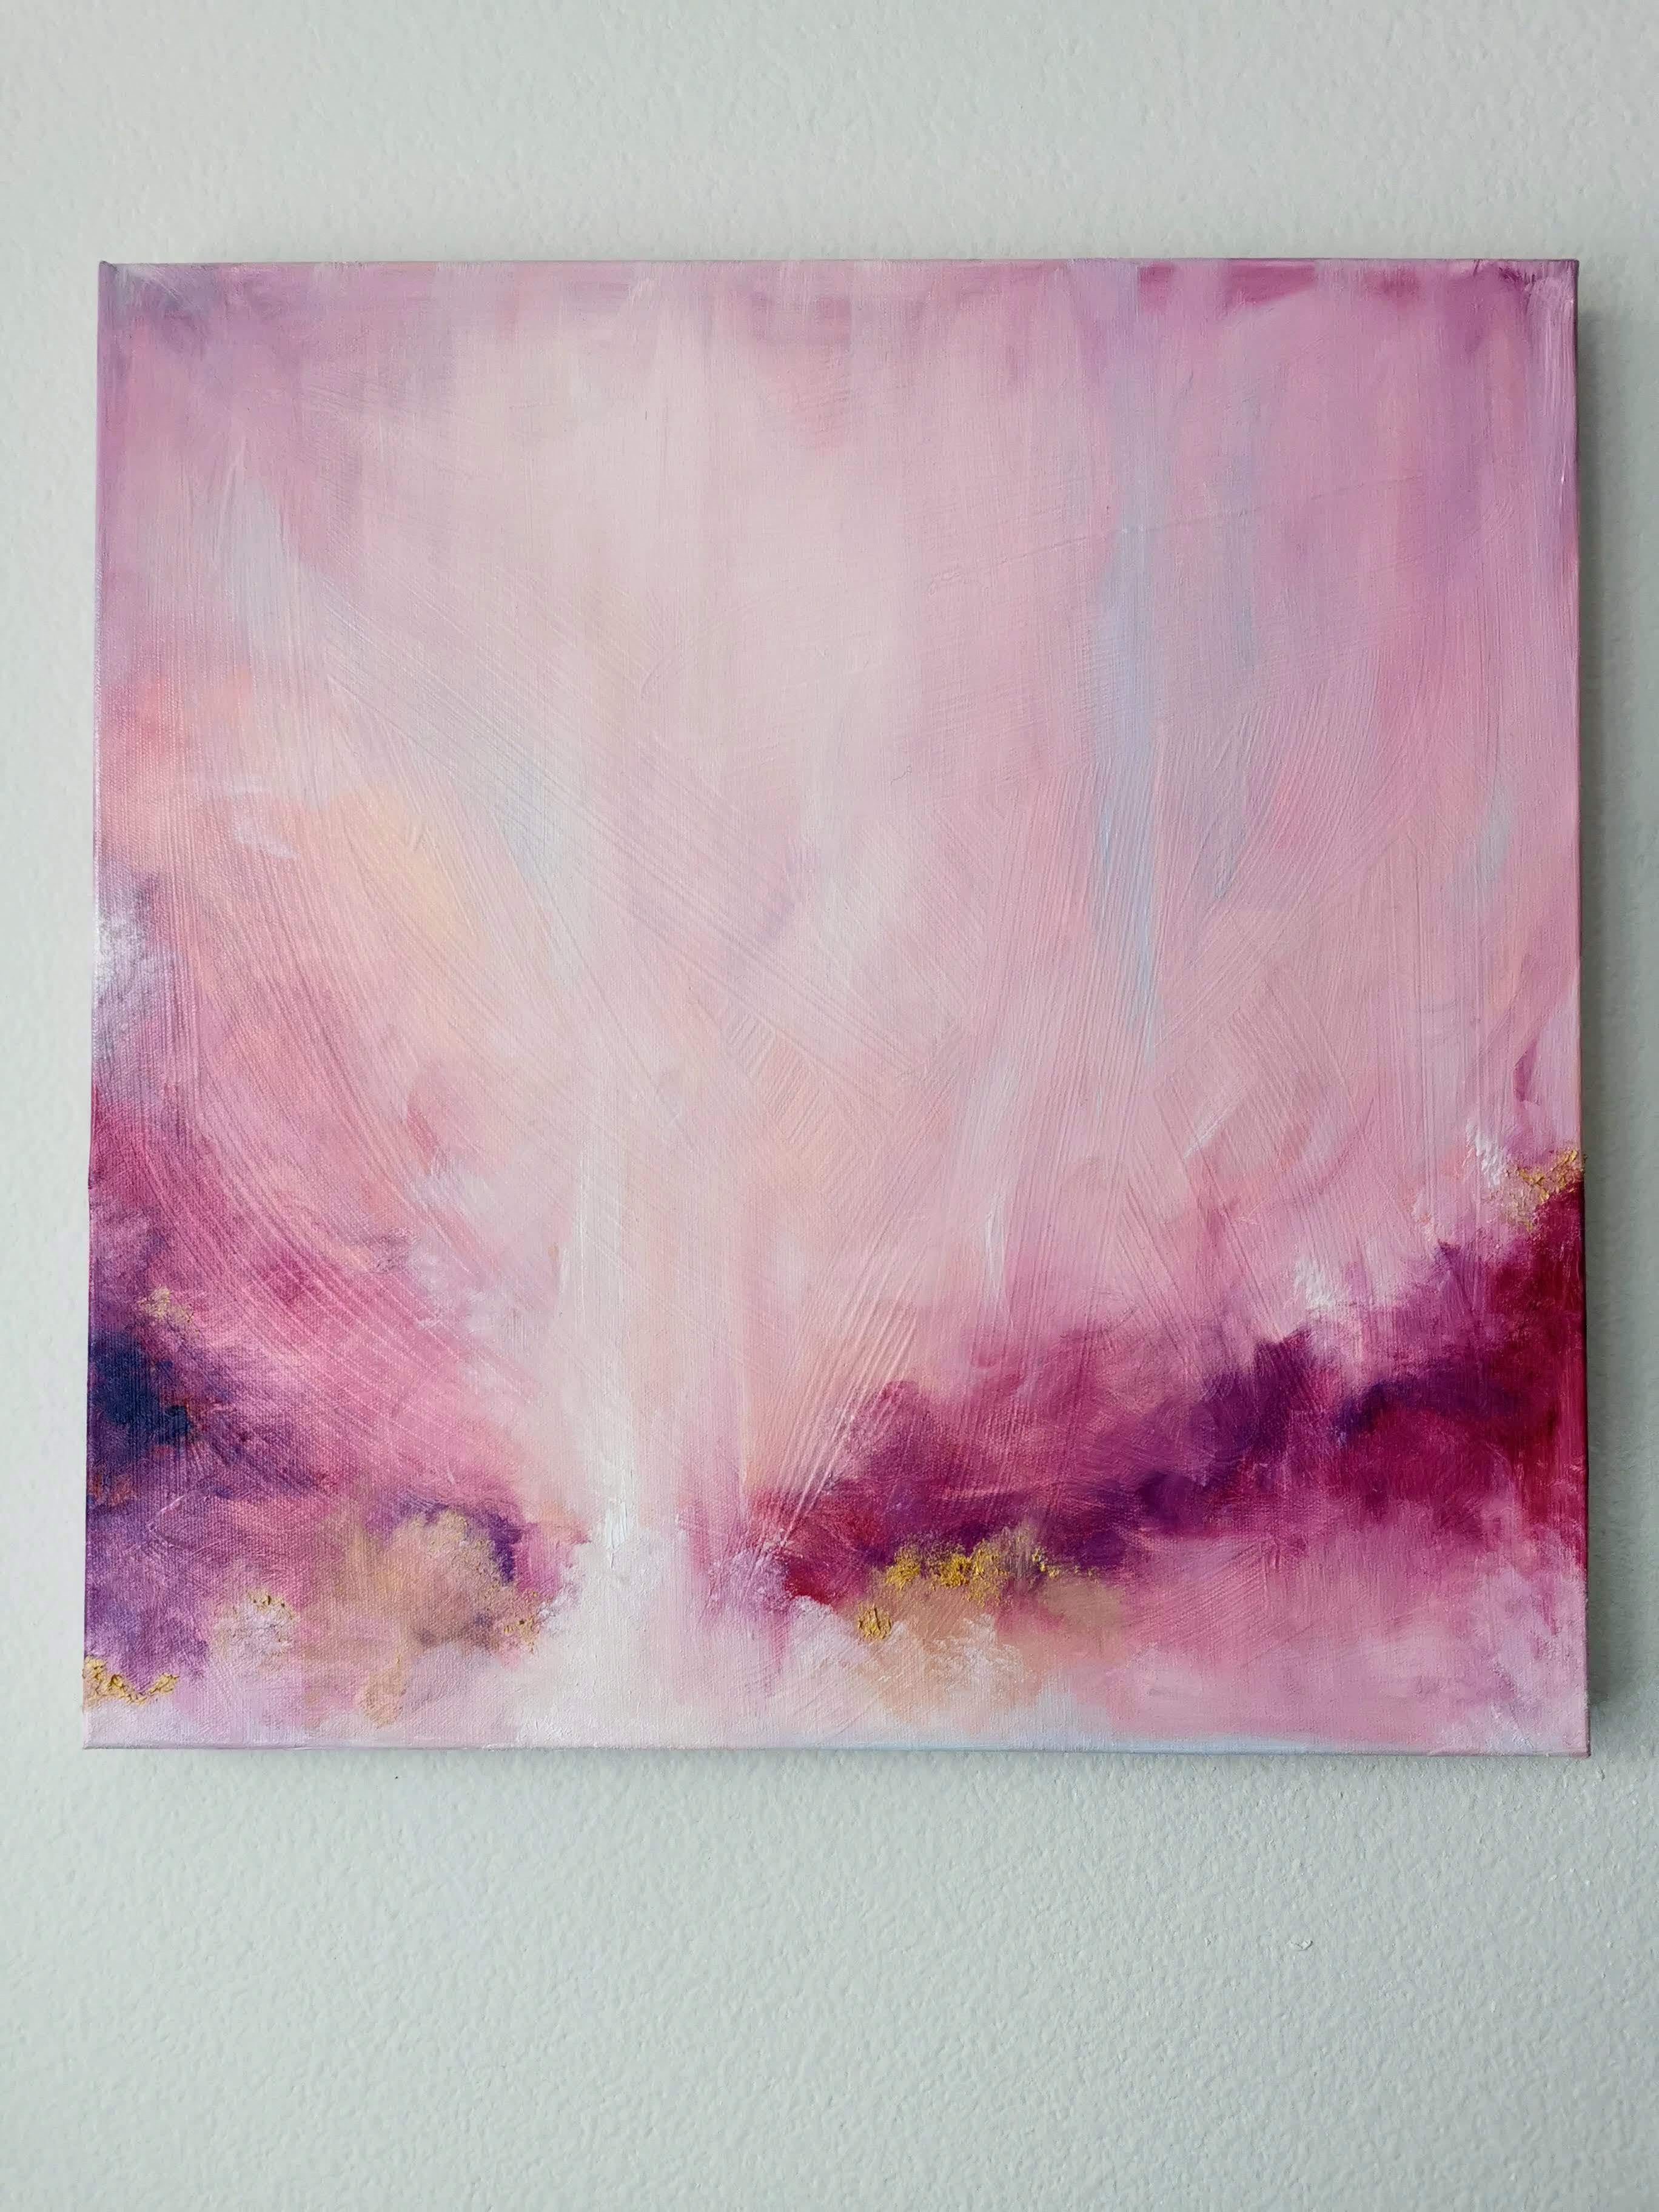 This is why I love you - Pink and gold abstract painting - Abstract Impressionist Painting by Jennifer L. Baker